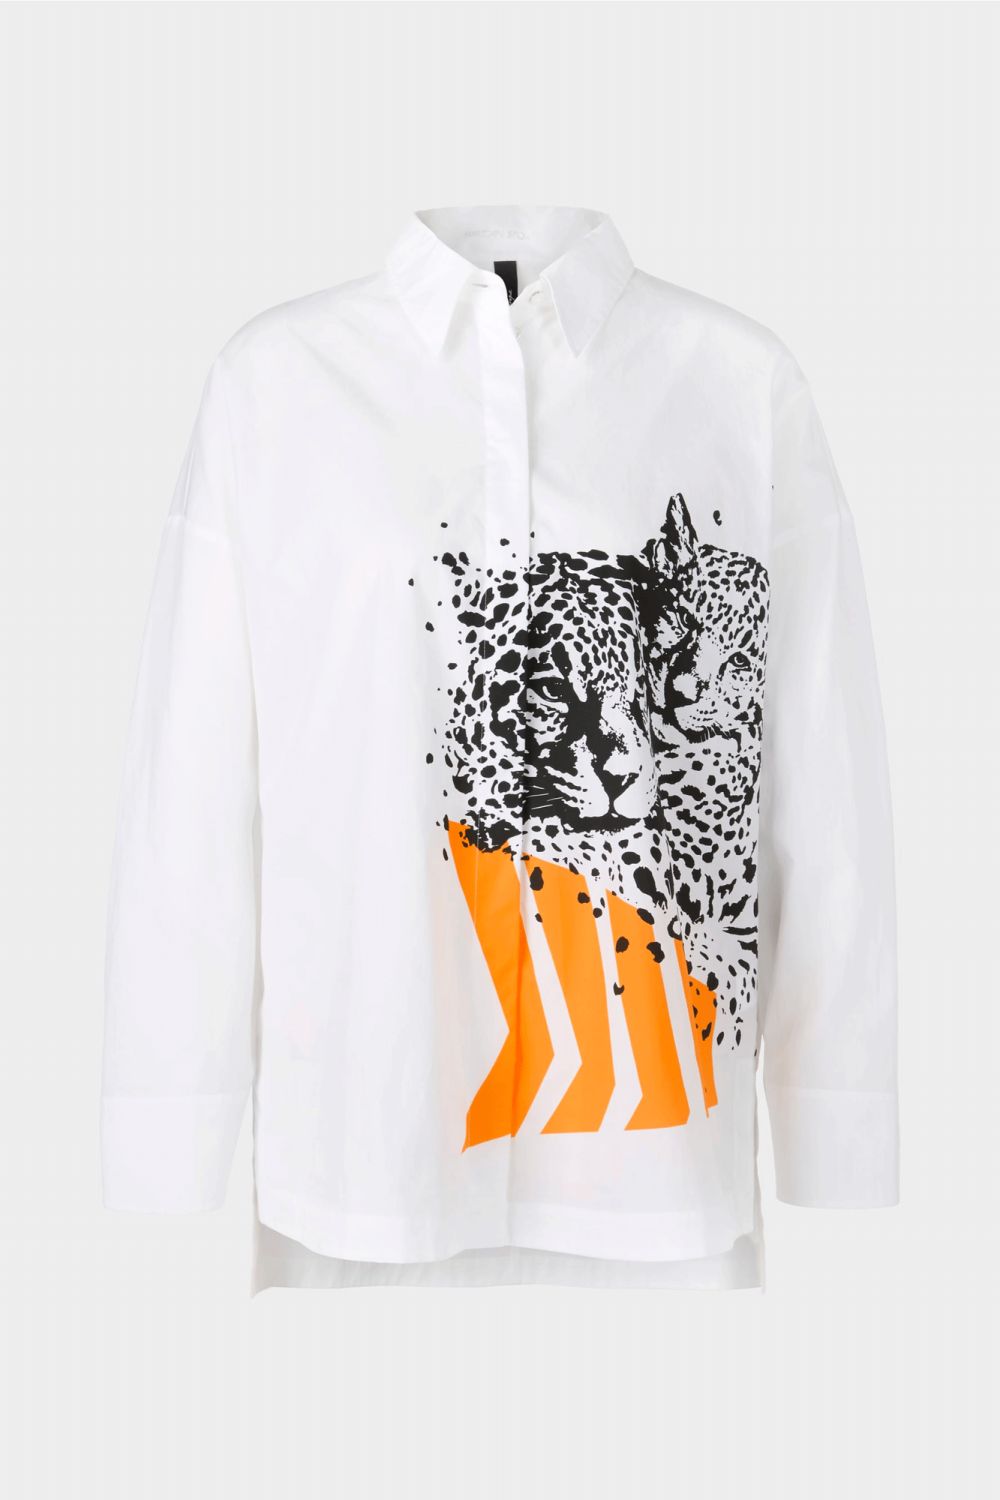 The Bold Types Tiger Blouse from Marc Cain has a luxurious feel and satisfying sustainability standards.